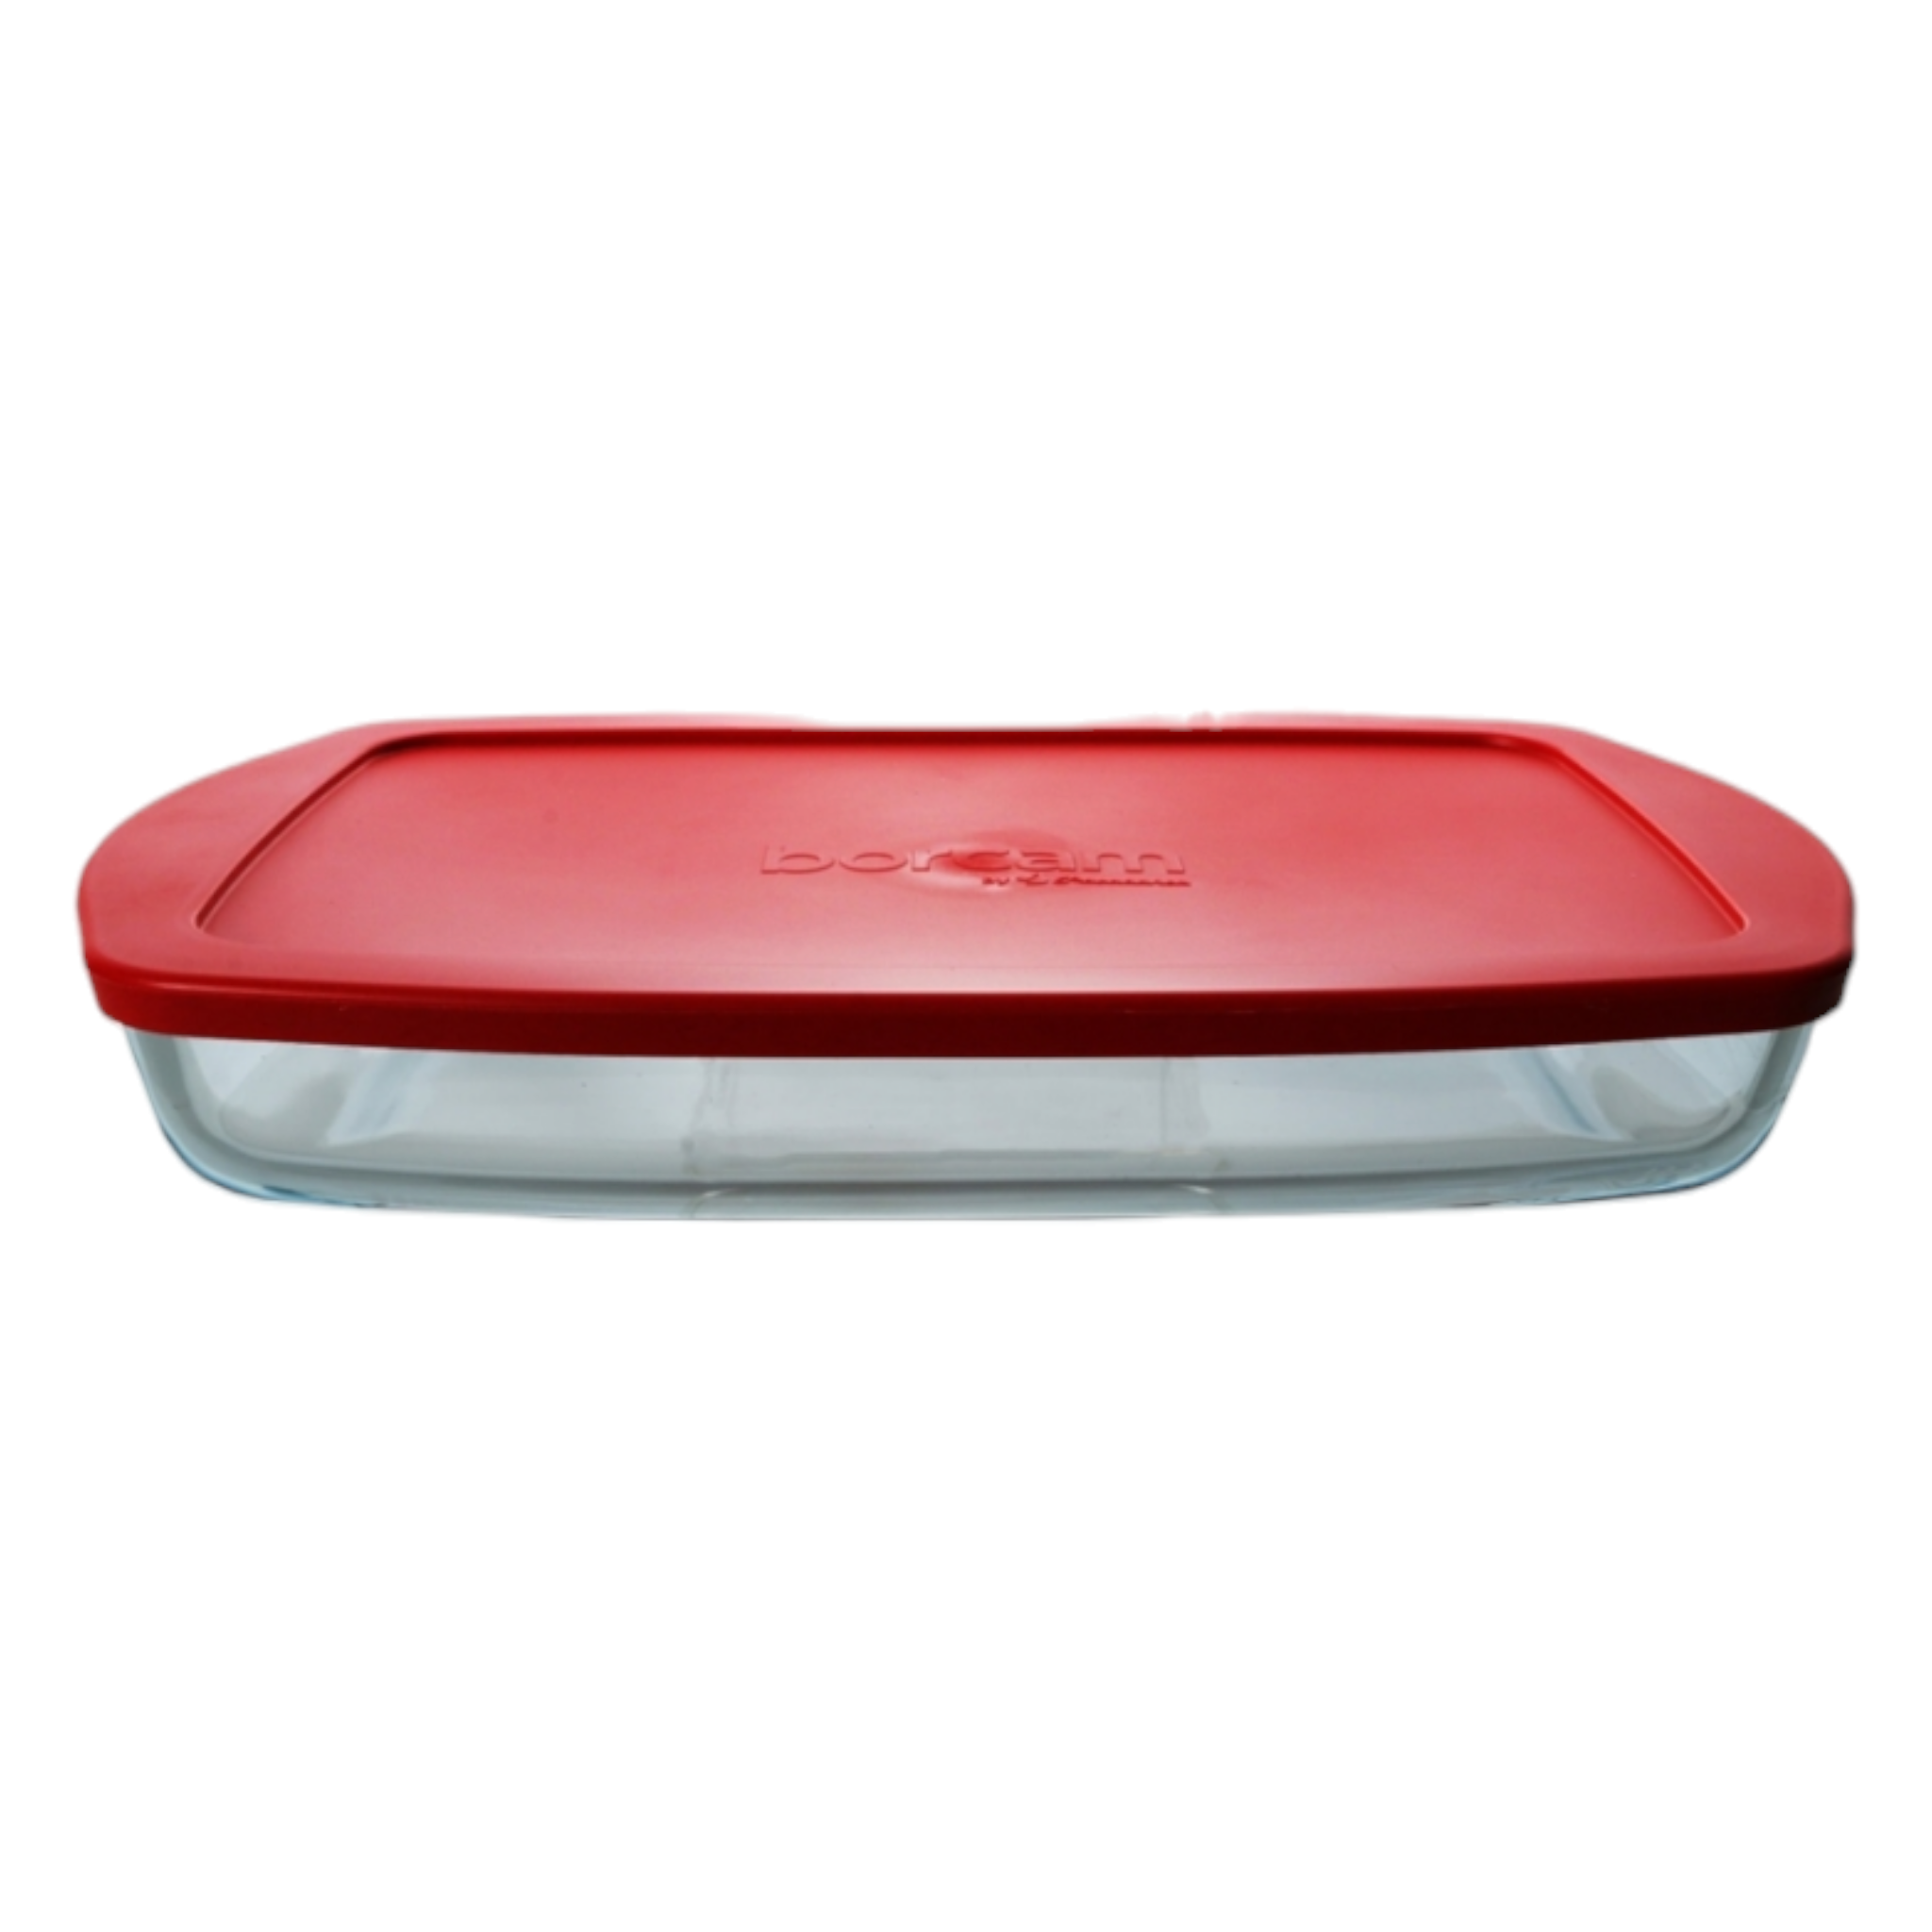 Borcam Glass Serving Dish Large Oven Dish Tray Rectangle with Red Lid 36x19x5cm 59006